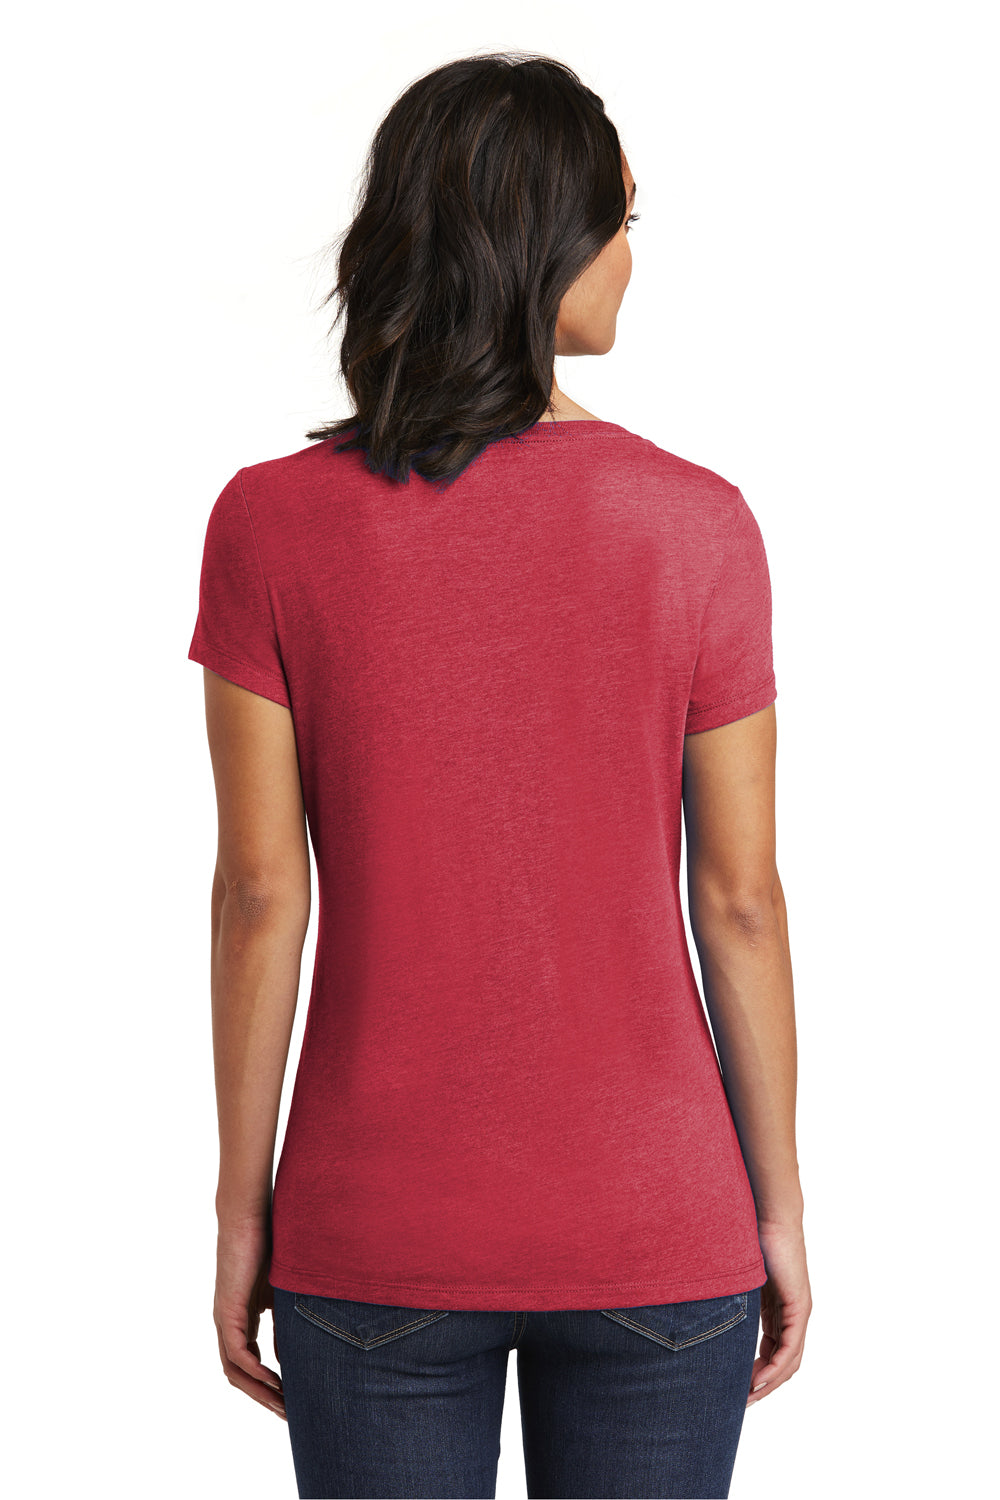 District DT6503 Womens Very Important Short Sleeve V-Neck T-Shirt Heather Red Back